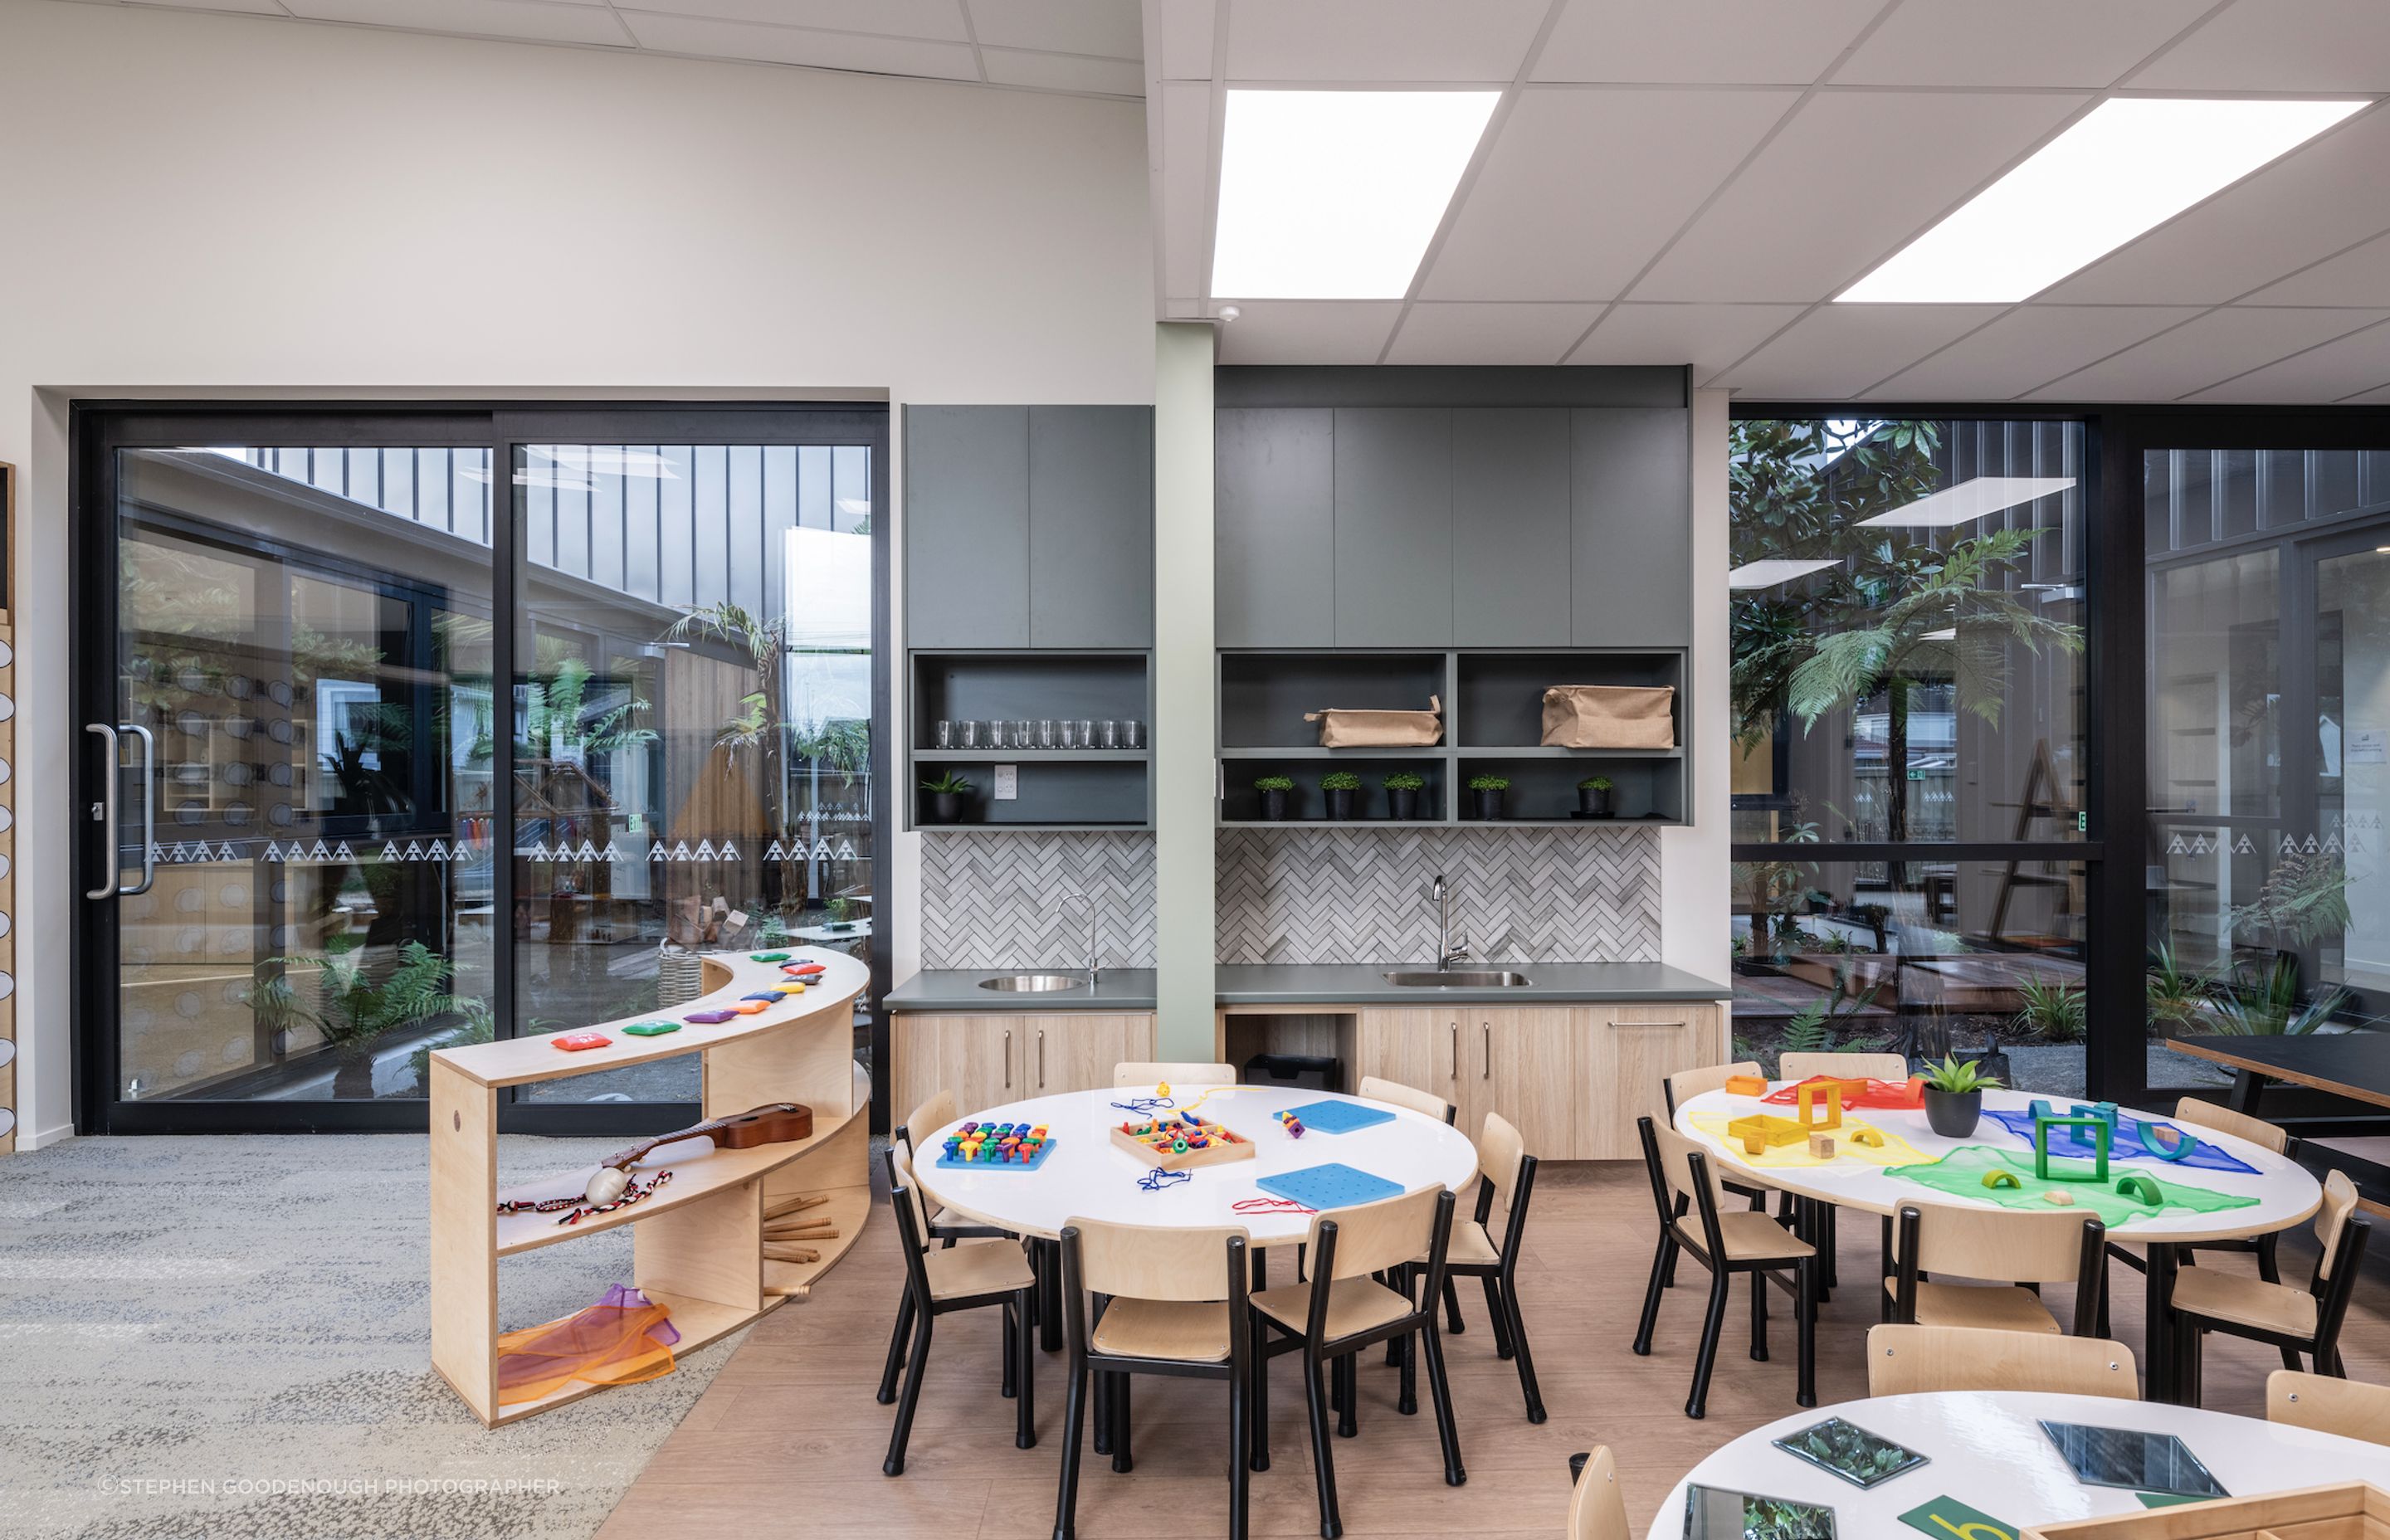 This design coalesces wonder-filled spaces with the daily curriculum to foster an environment that is deliberately crafted to be both aesthetically and intellectually stimulating to a child.